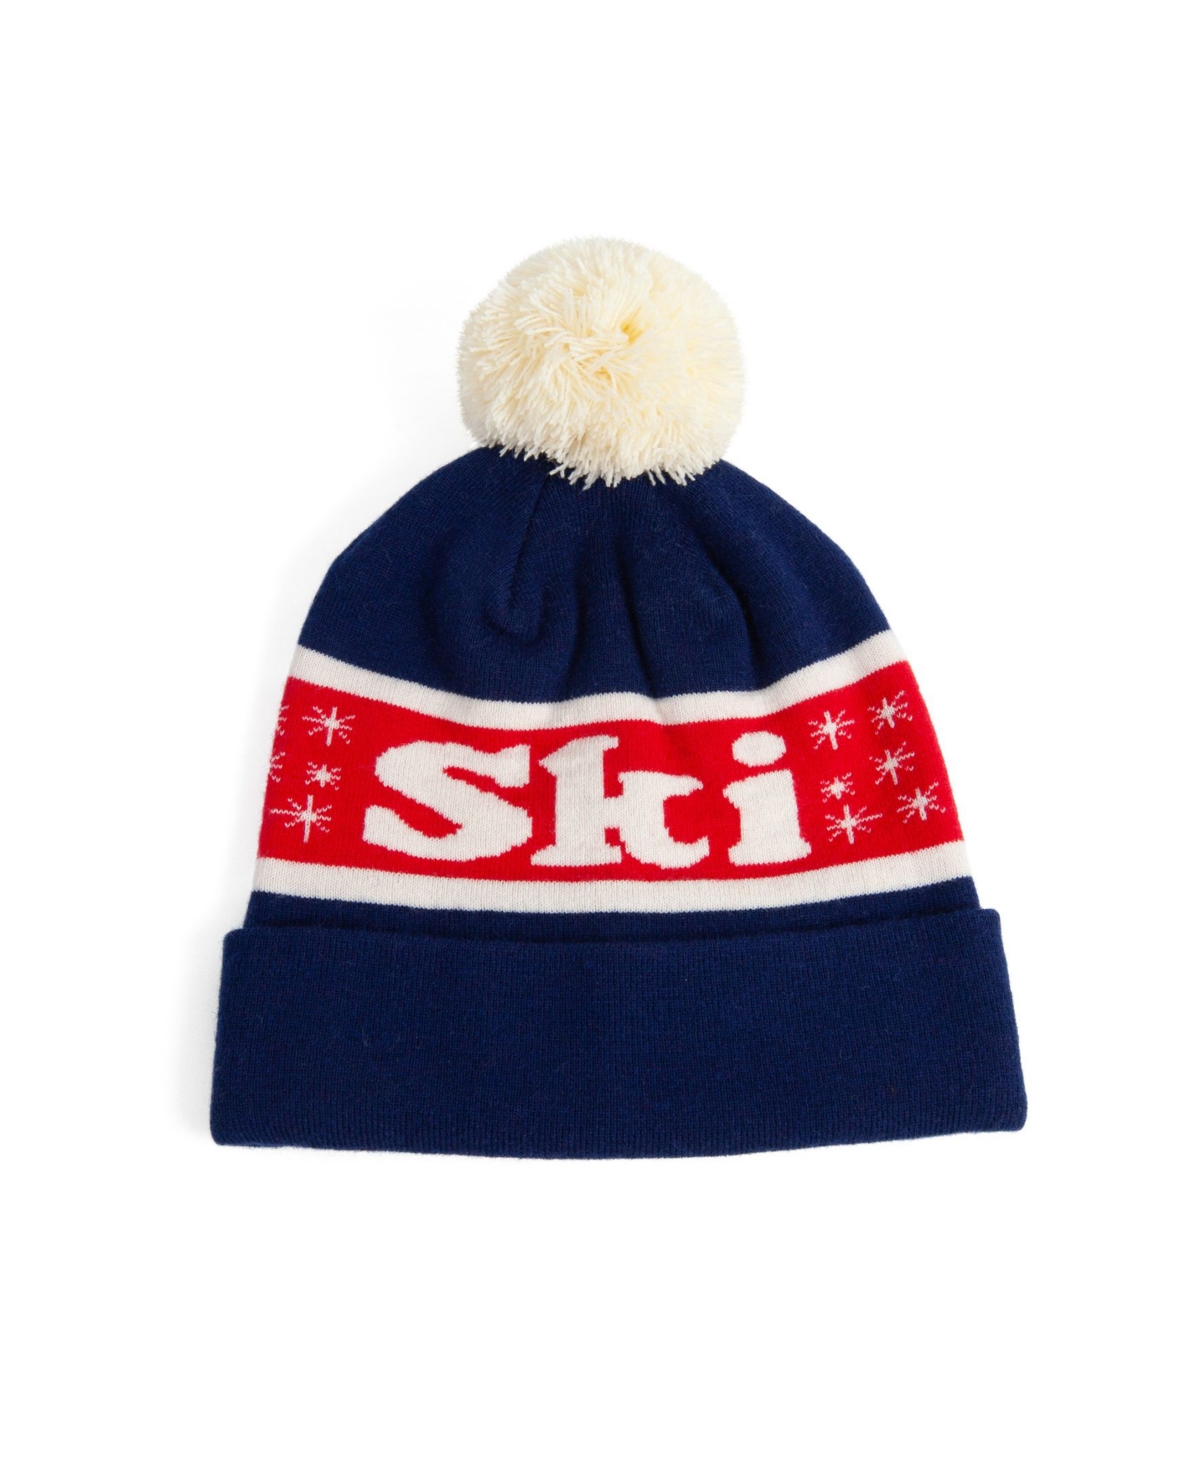 Shady Lady Women's Ski Lady Winter Hats In Blue,red,white